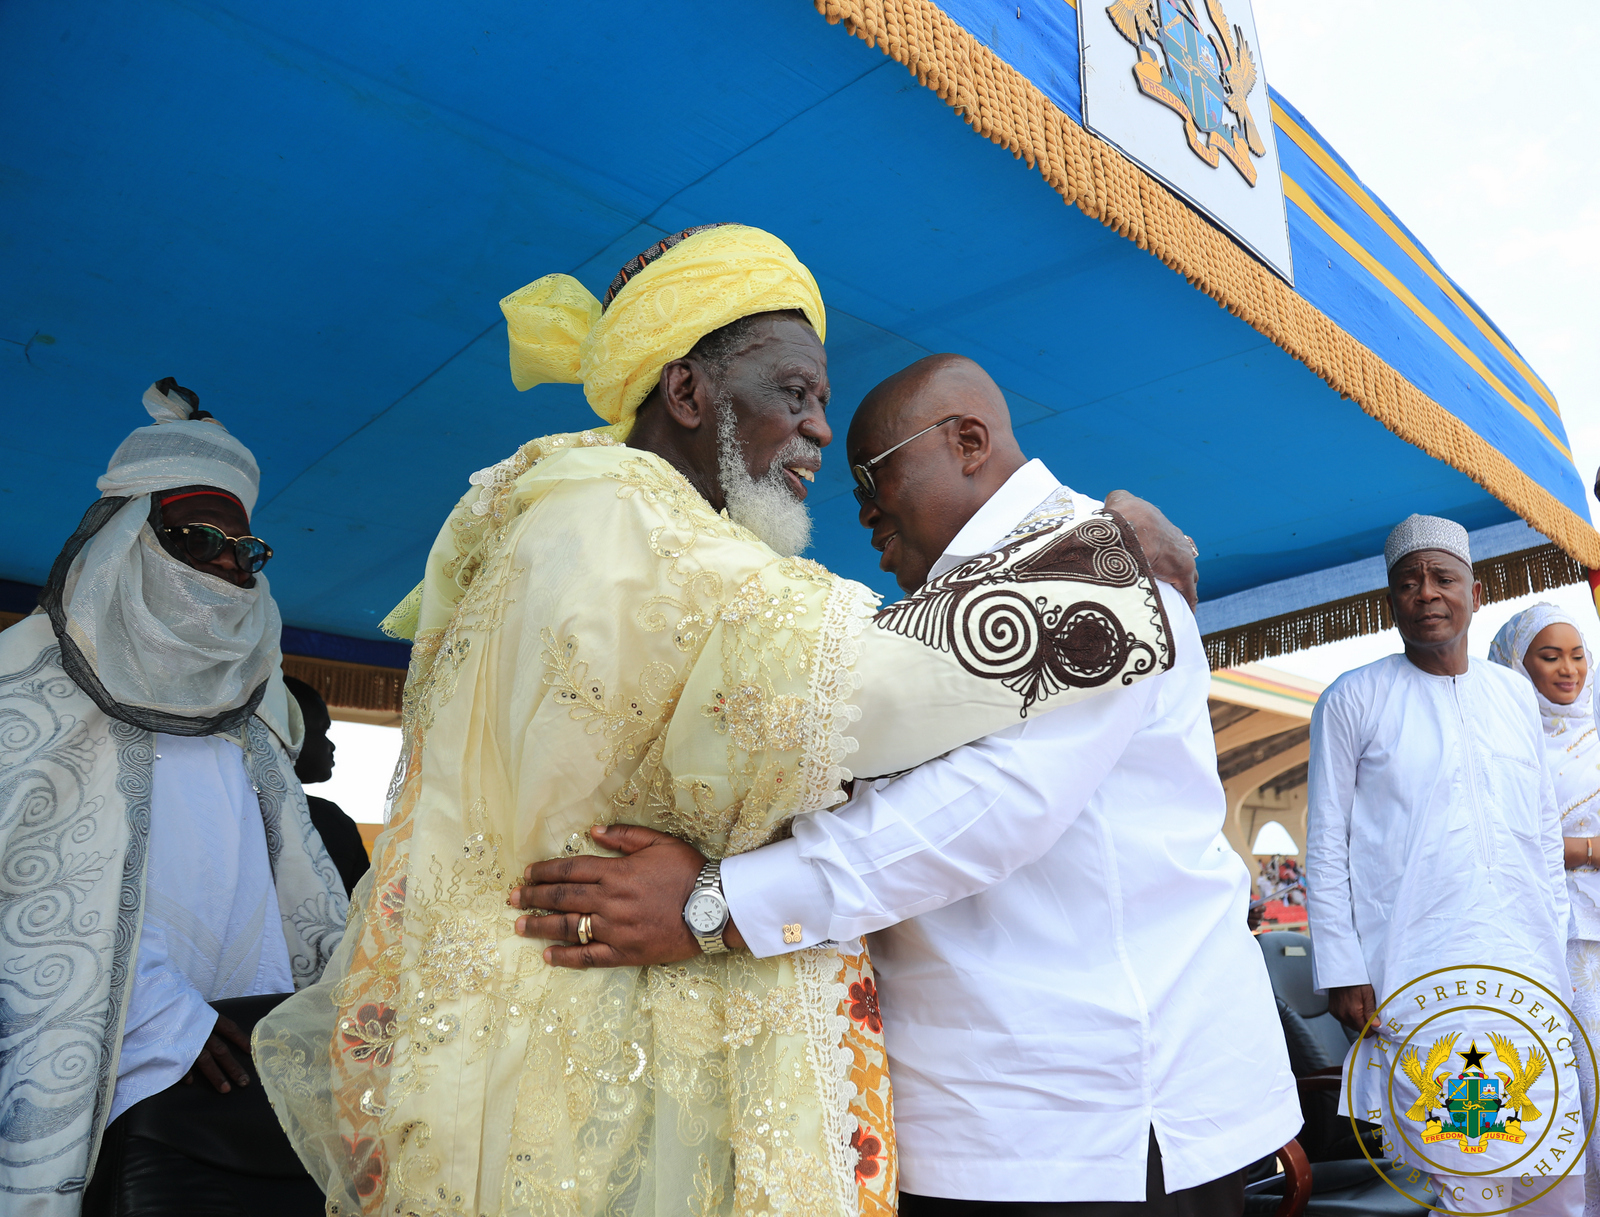 President Akufo-Addo in an embrace with the National Chief Imam